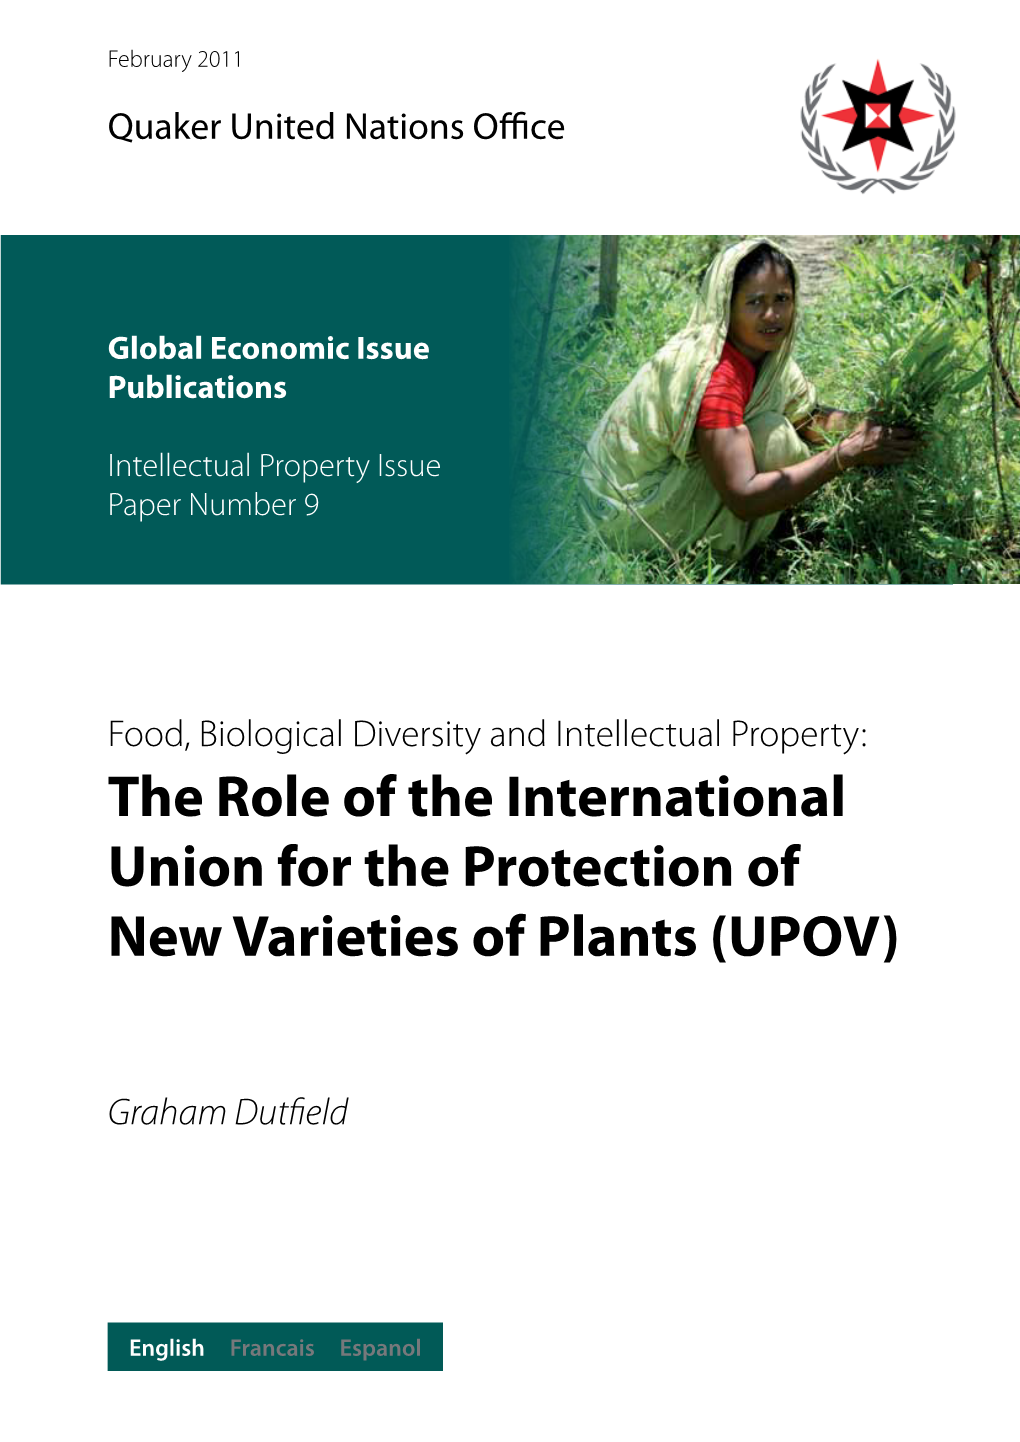 The Role of the International Union for the Protection of New Varieties of Plants (UPOV)